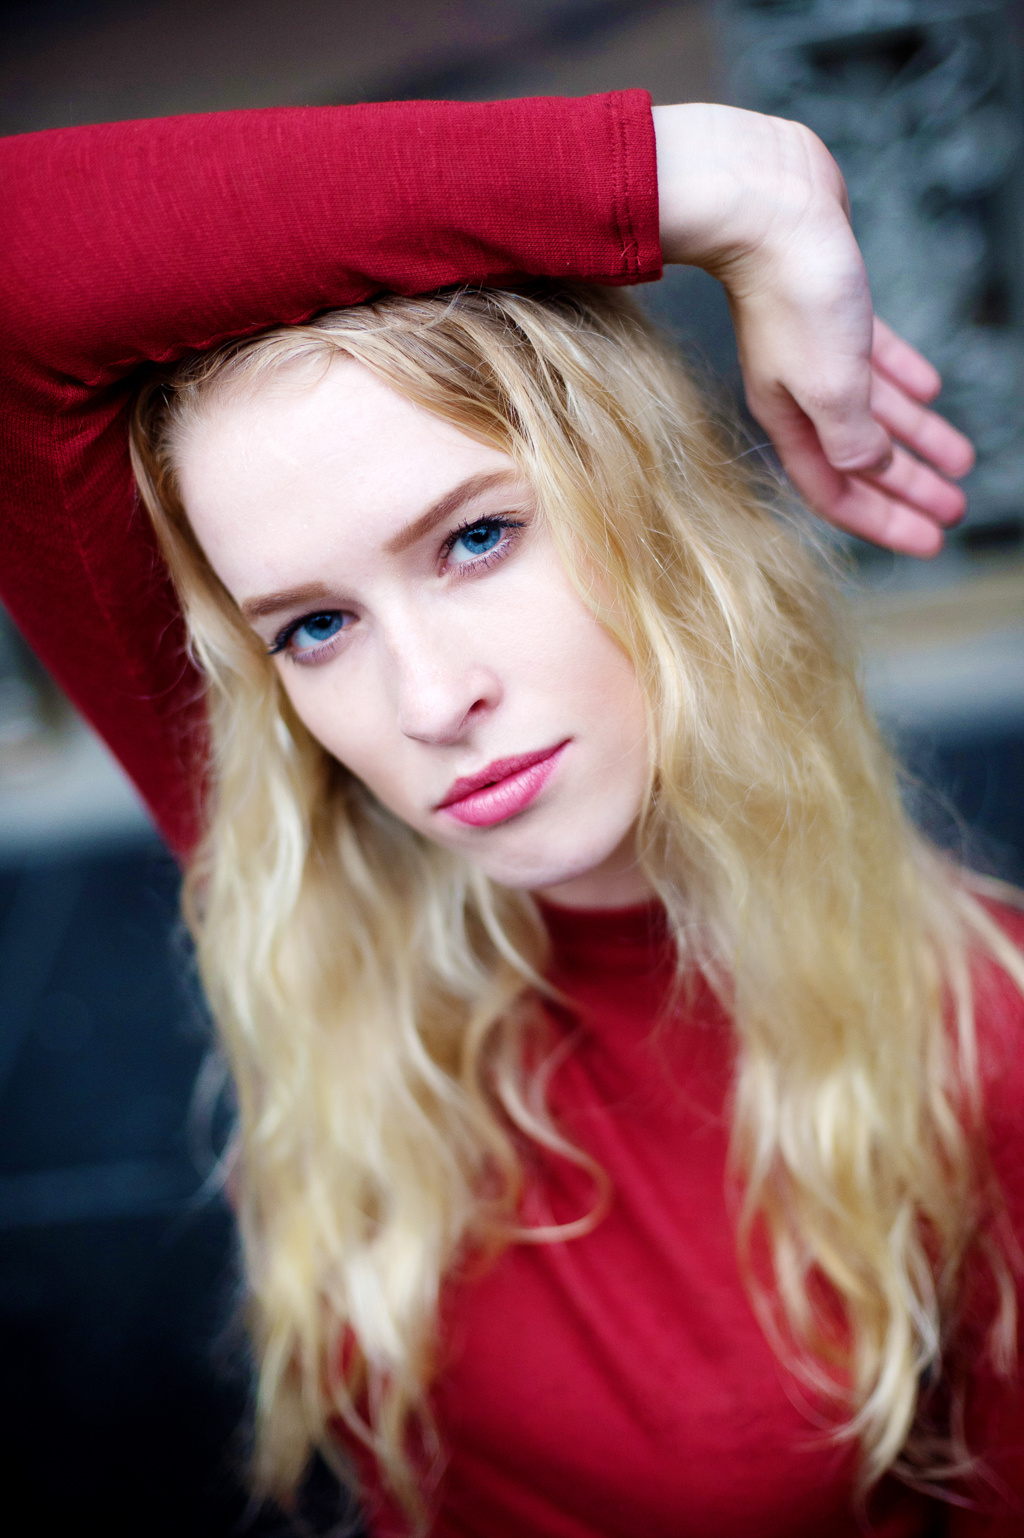 a model in a red dress with long blonde hair looks intently at the camera with her arm over her head